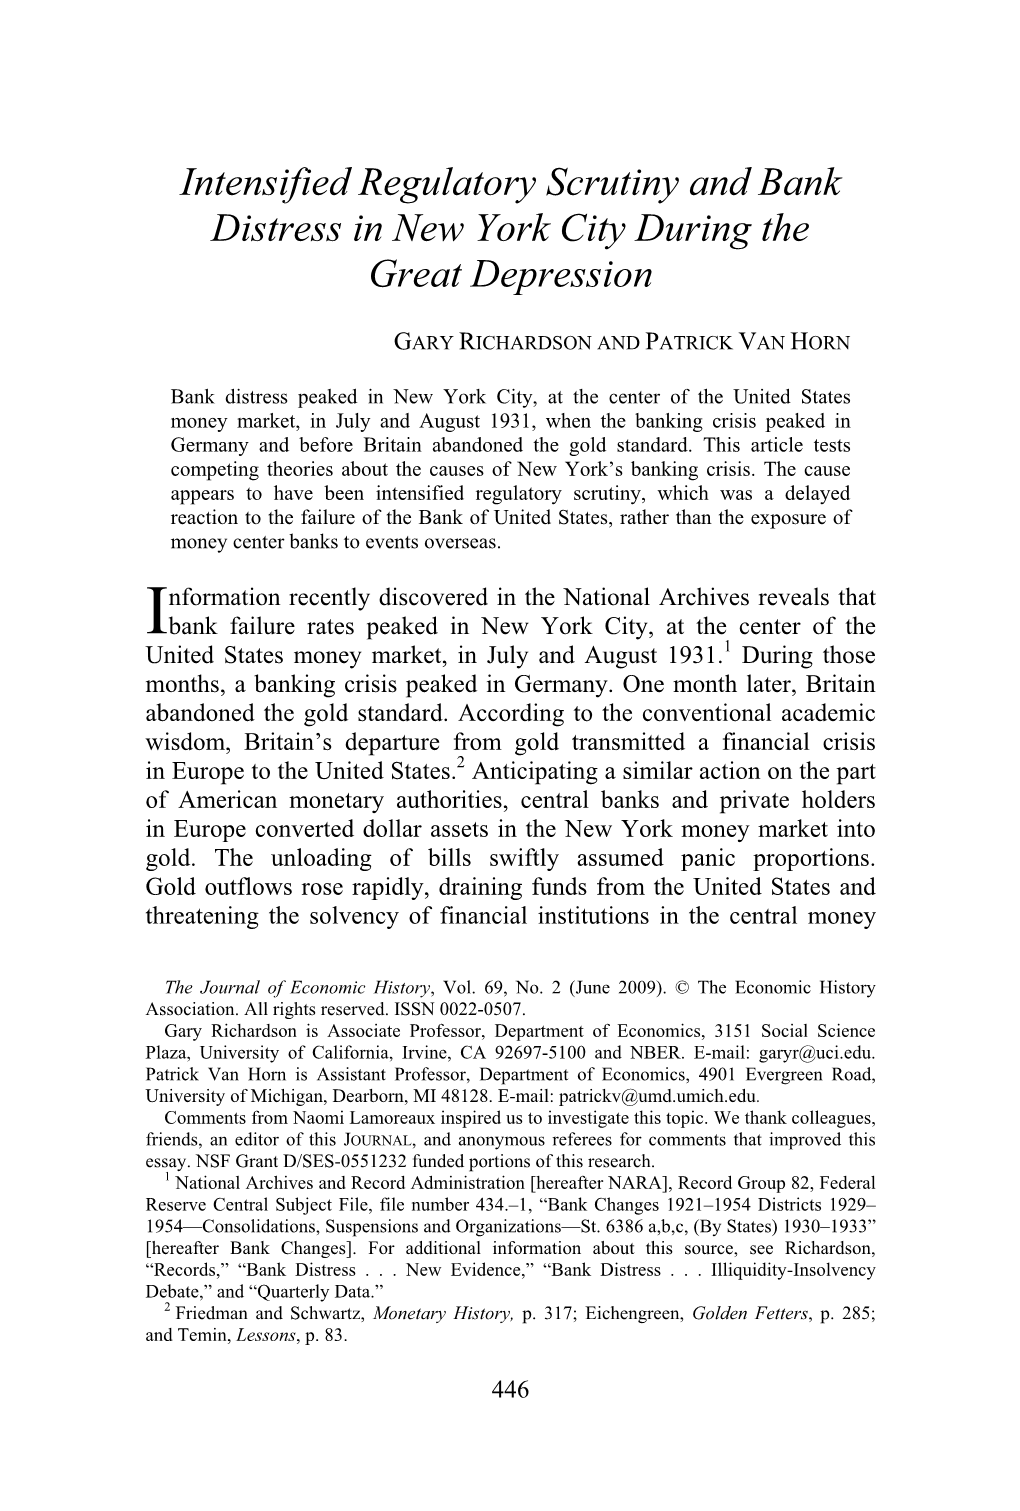 Intensified Regulatory Scrutiny and Bank Distress in New York City During the Great Depression  GARY RICHARDSON and PATRICK VAN HORN